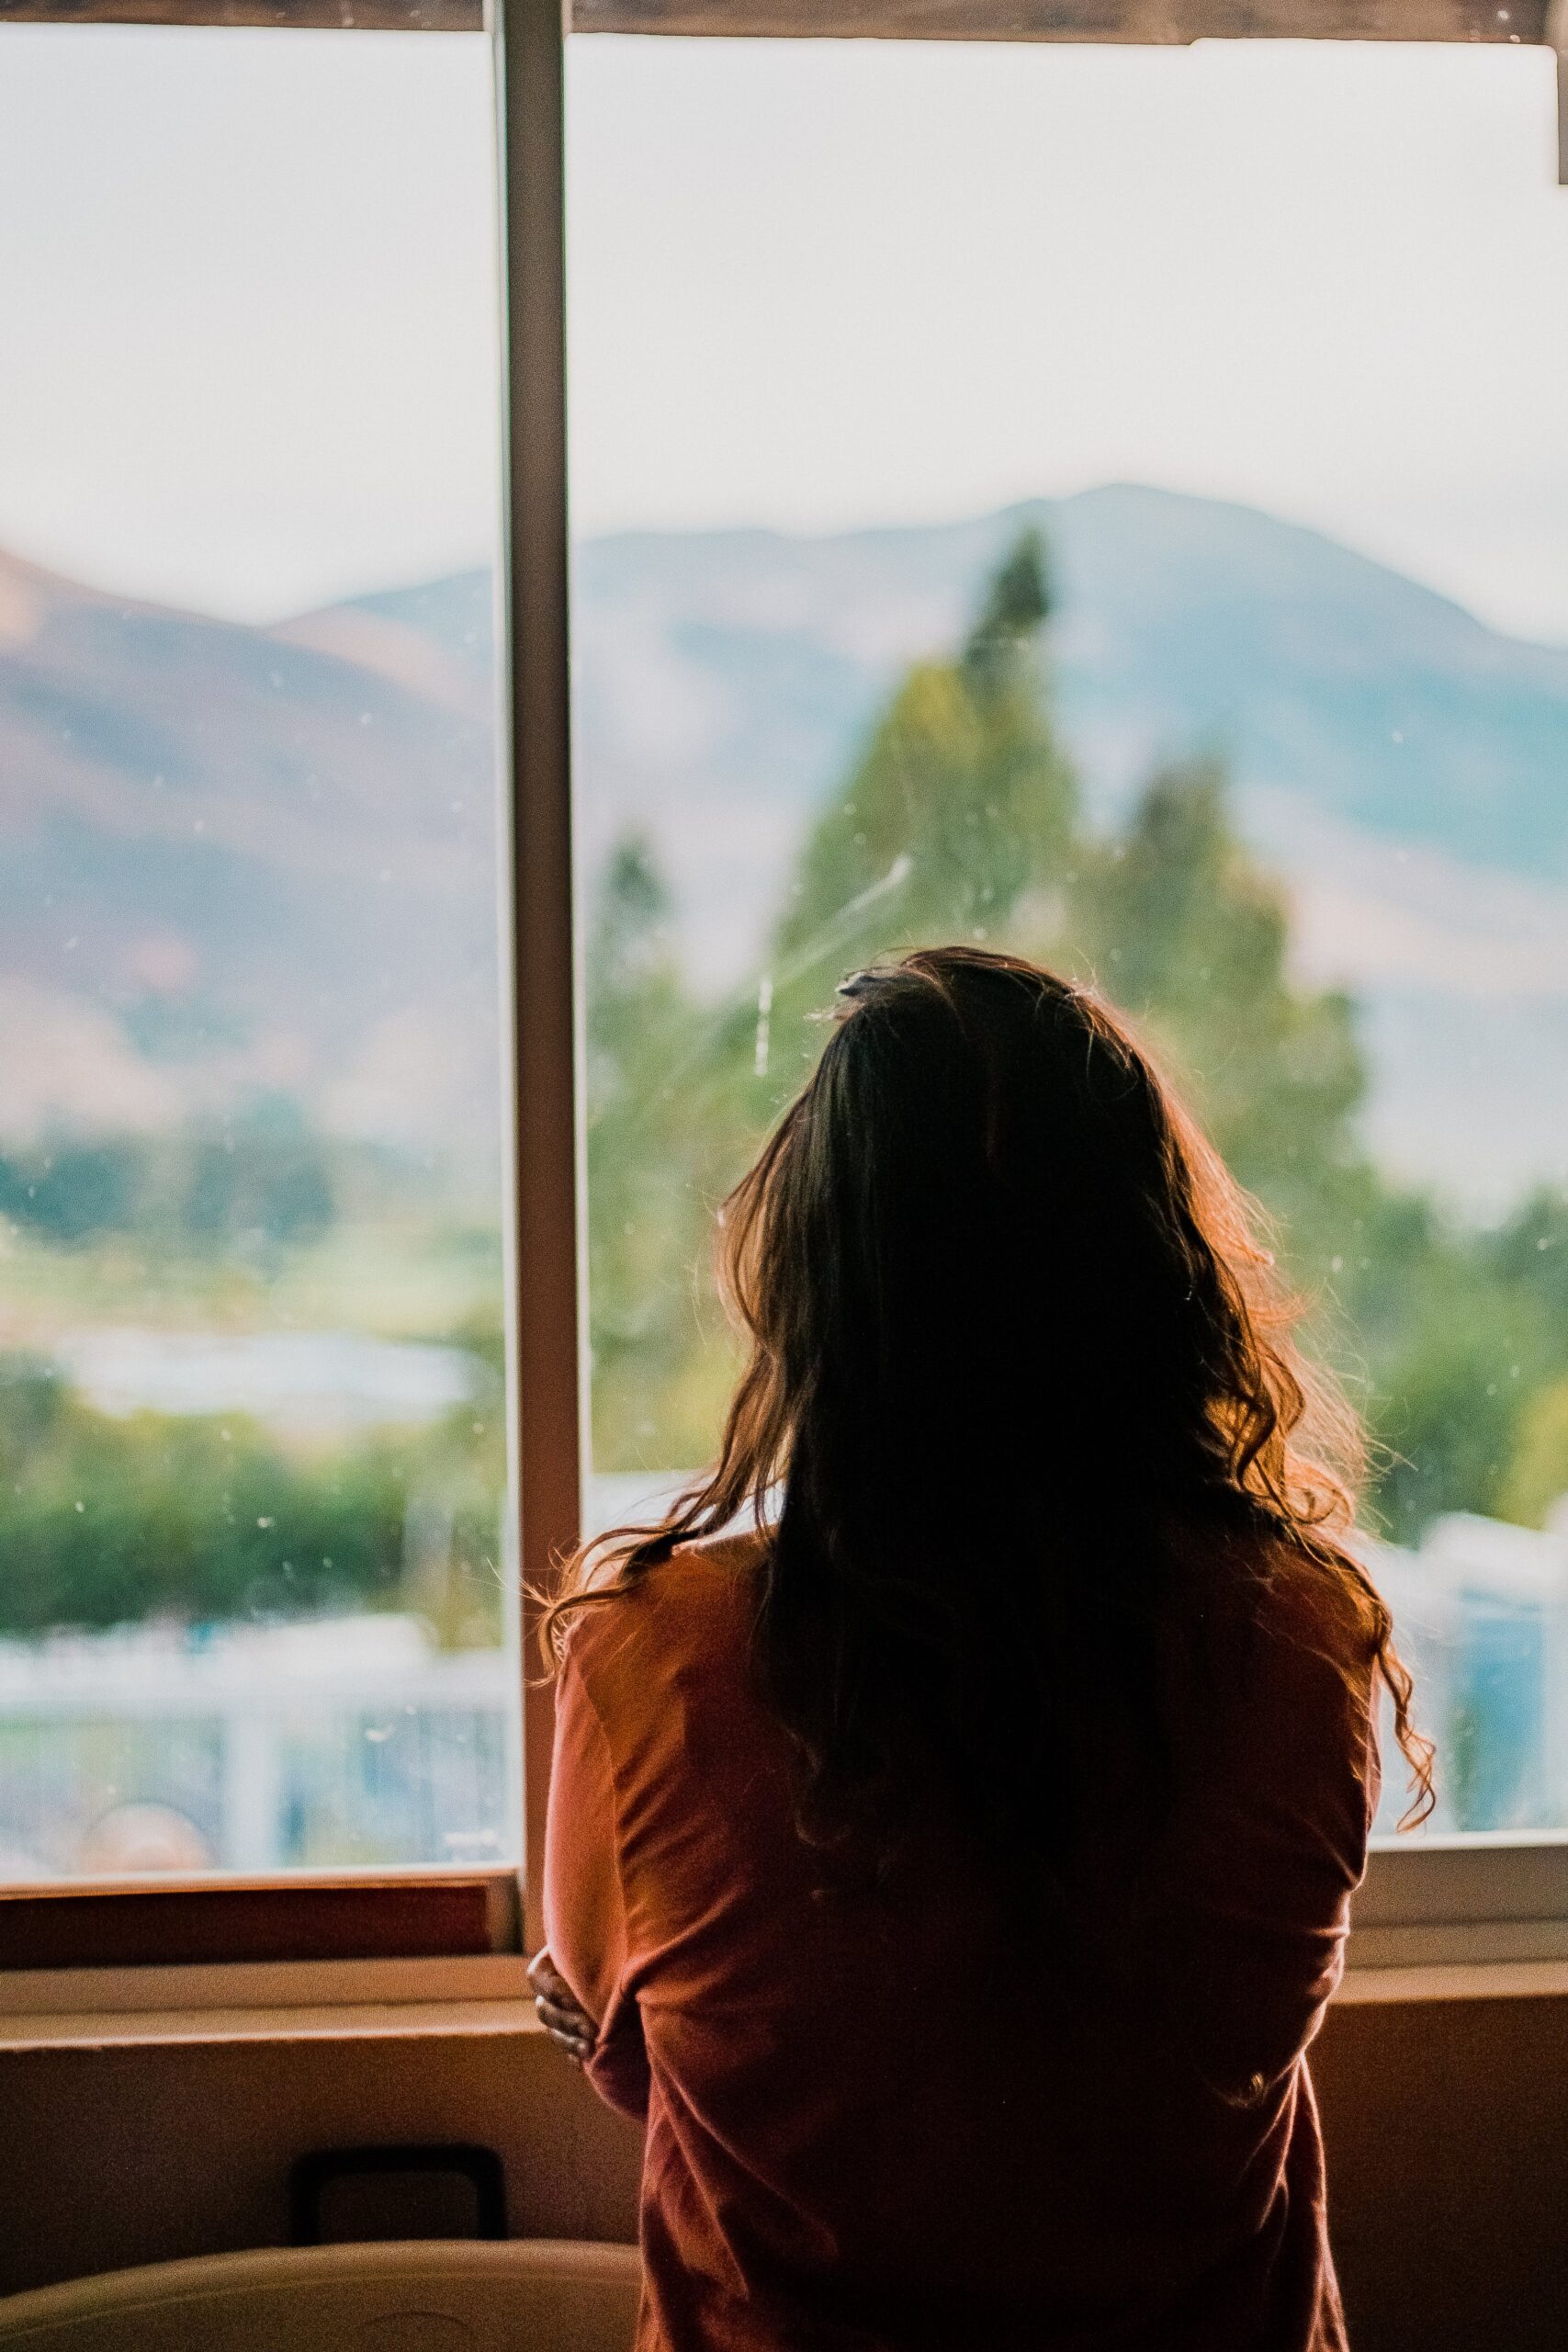 Young woman with long, dark hair looks out a window at an out-of-focus outdoor scene